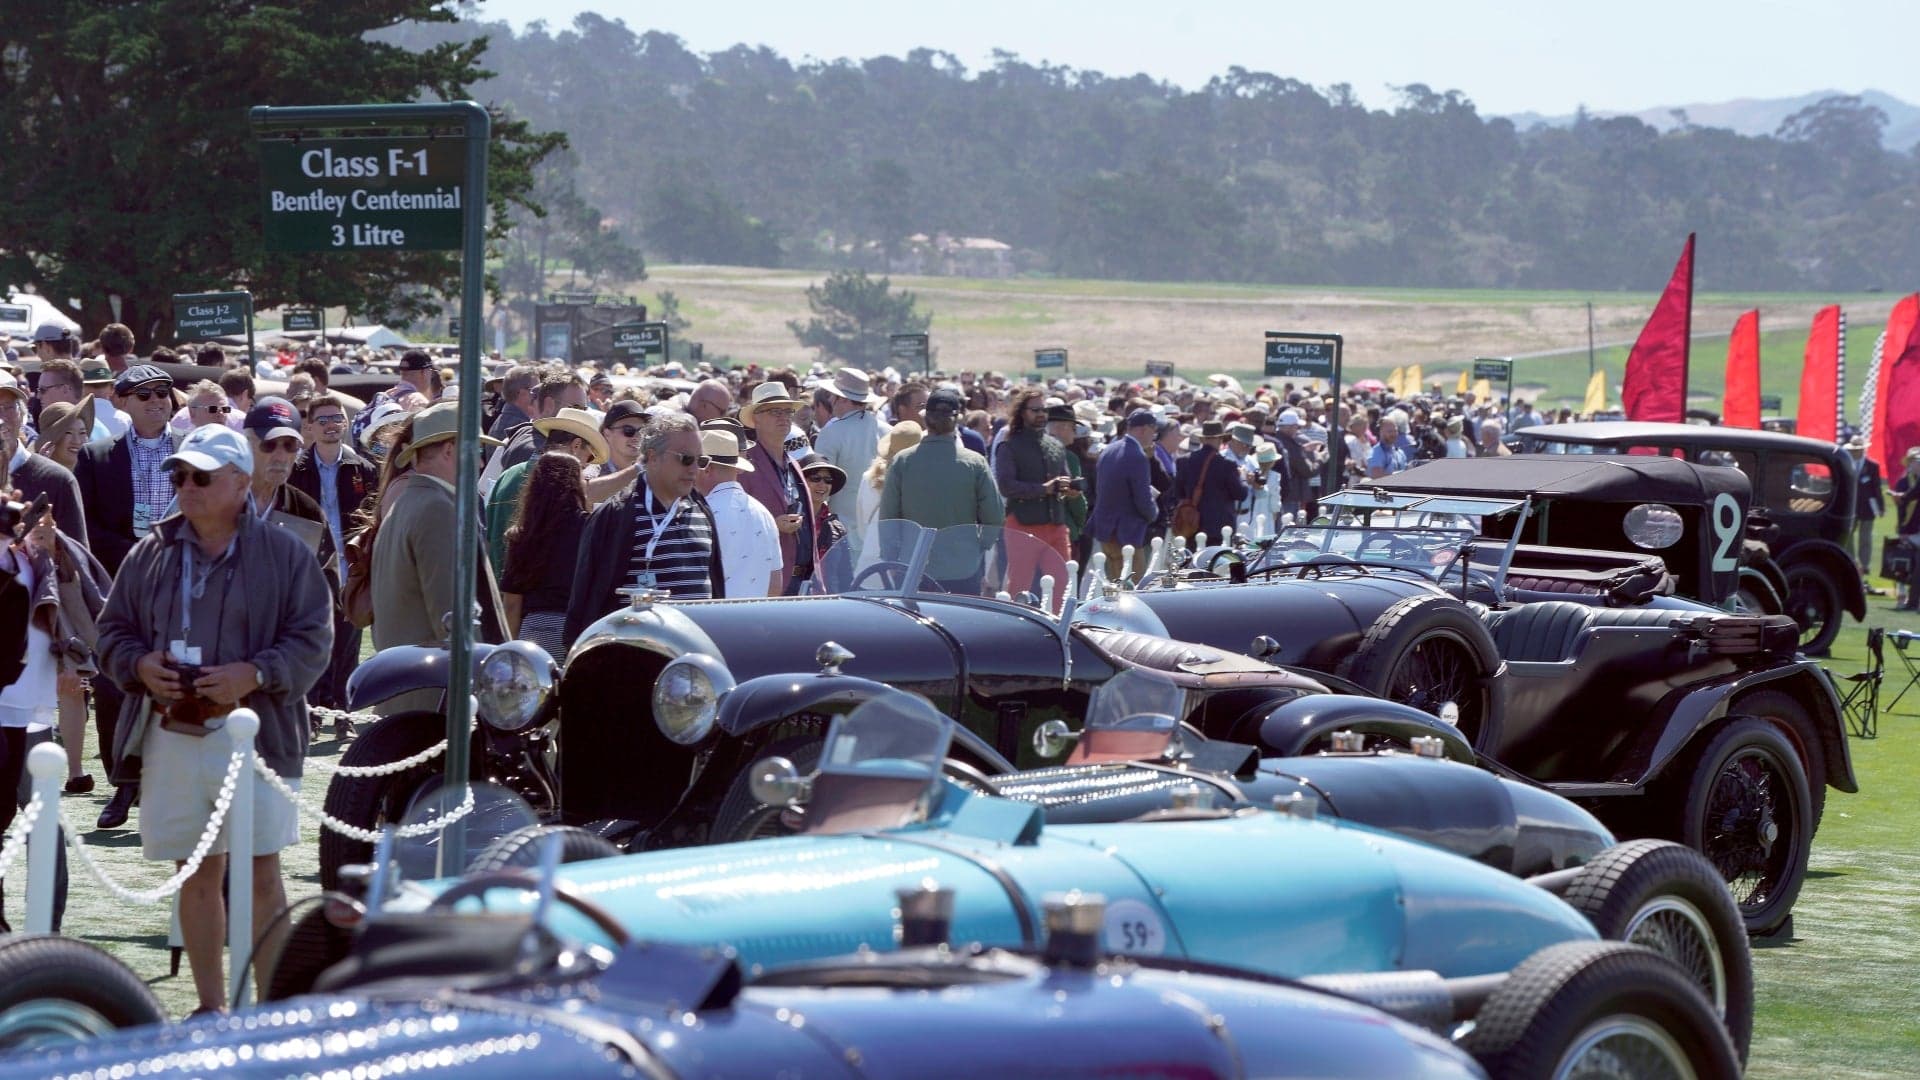 2020 Pebble Beach Concours d’Elegance Has Been Canceled for Obvious Reasons